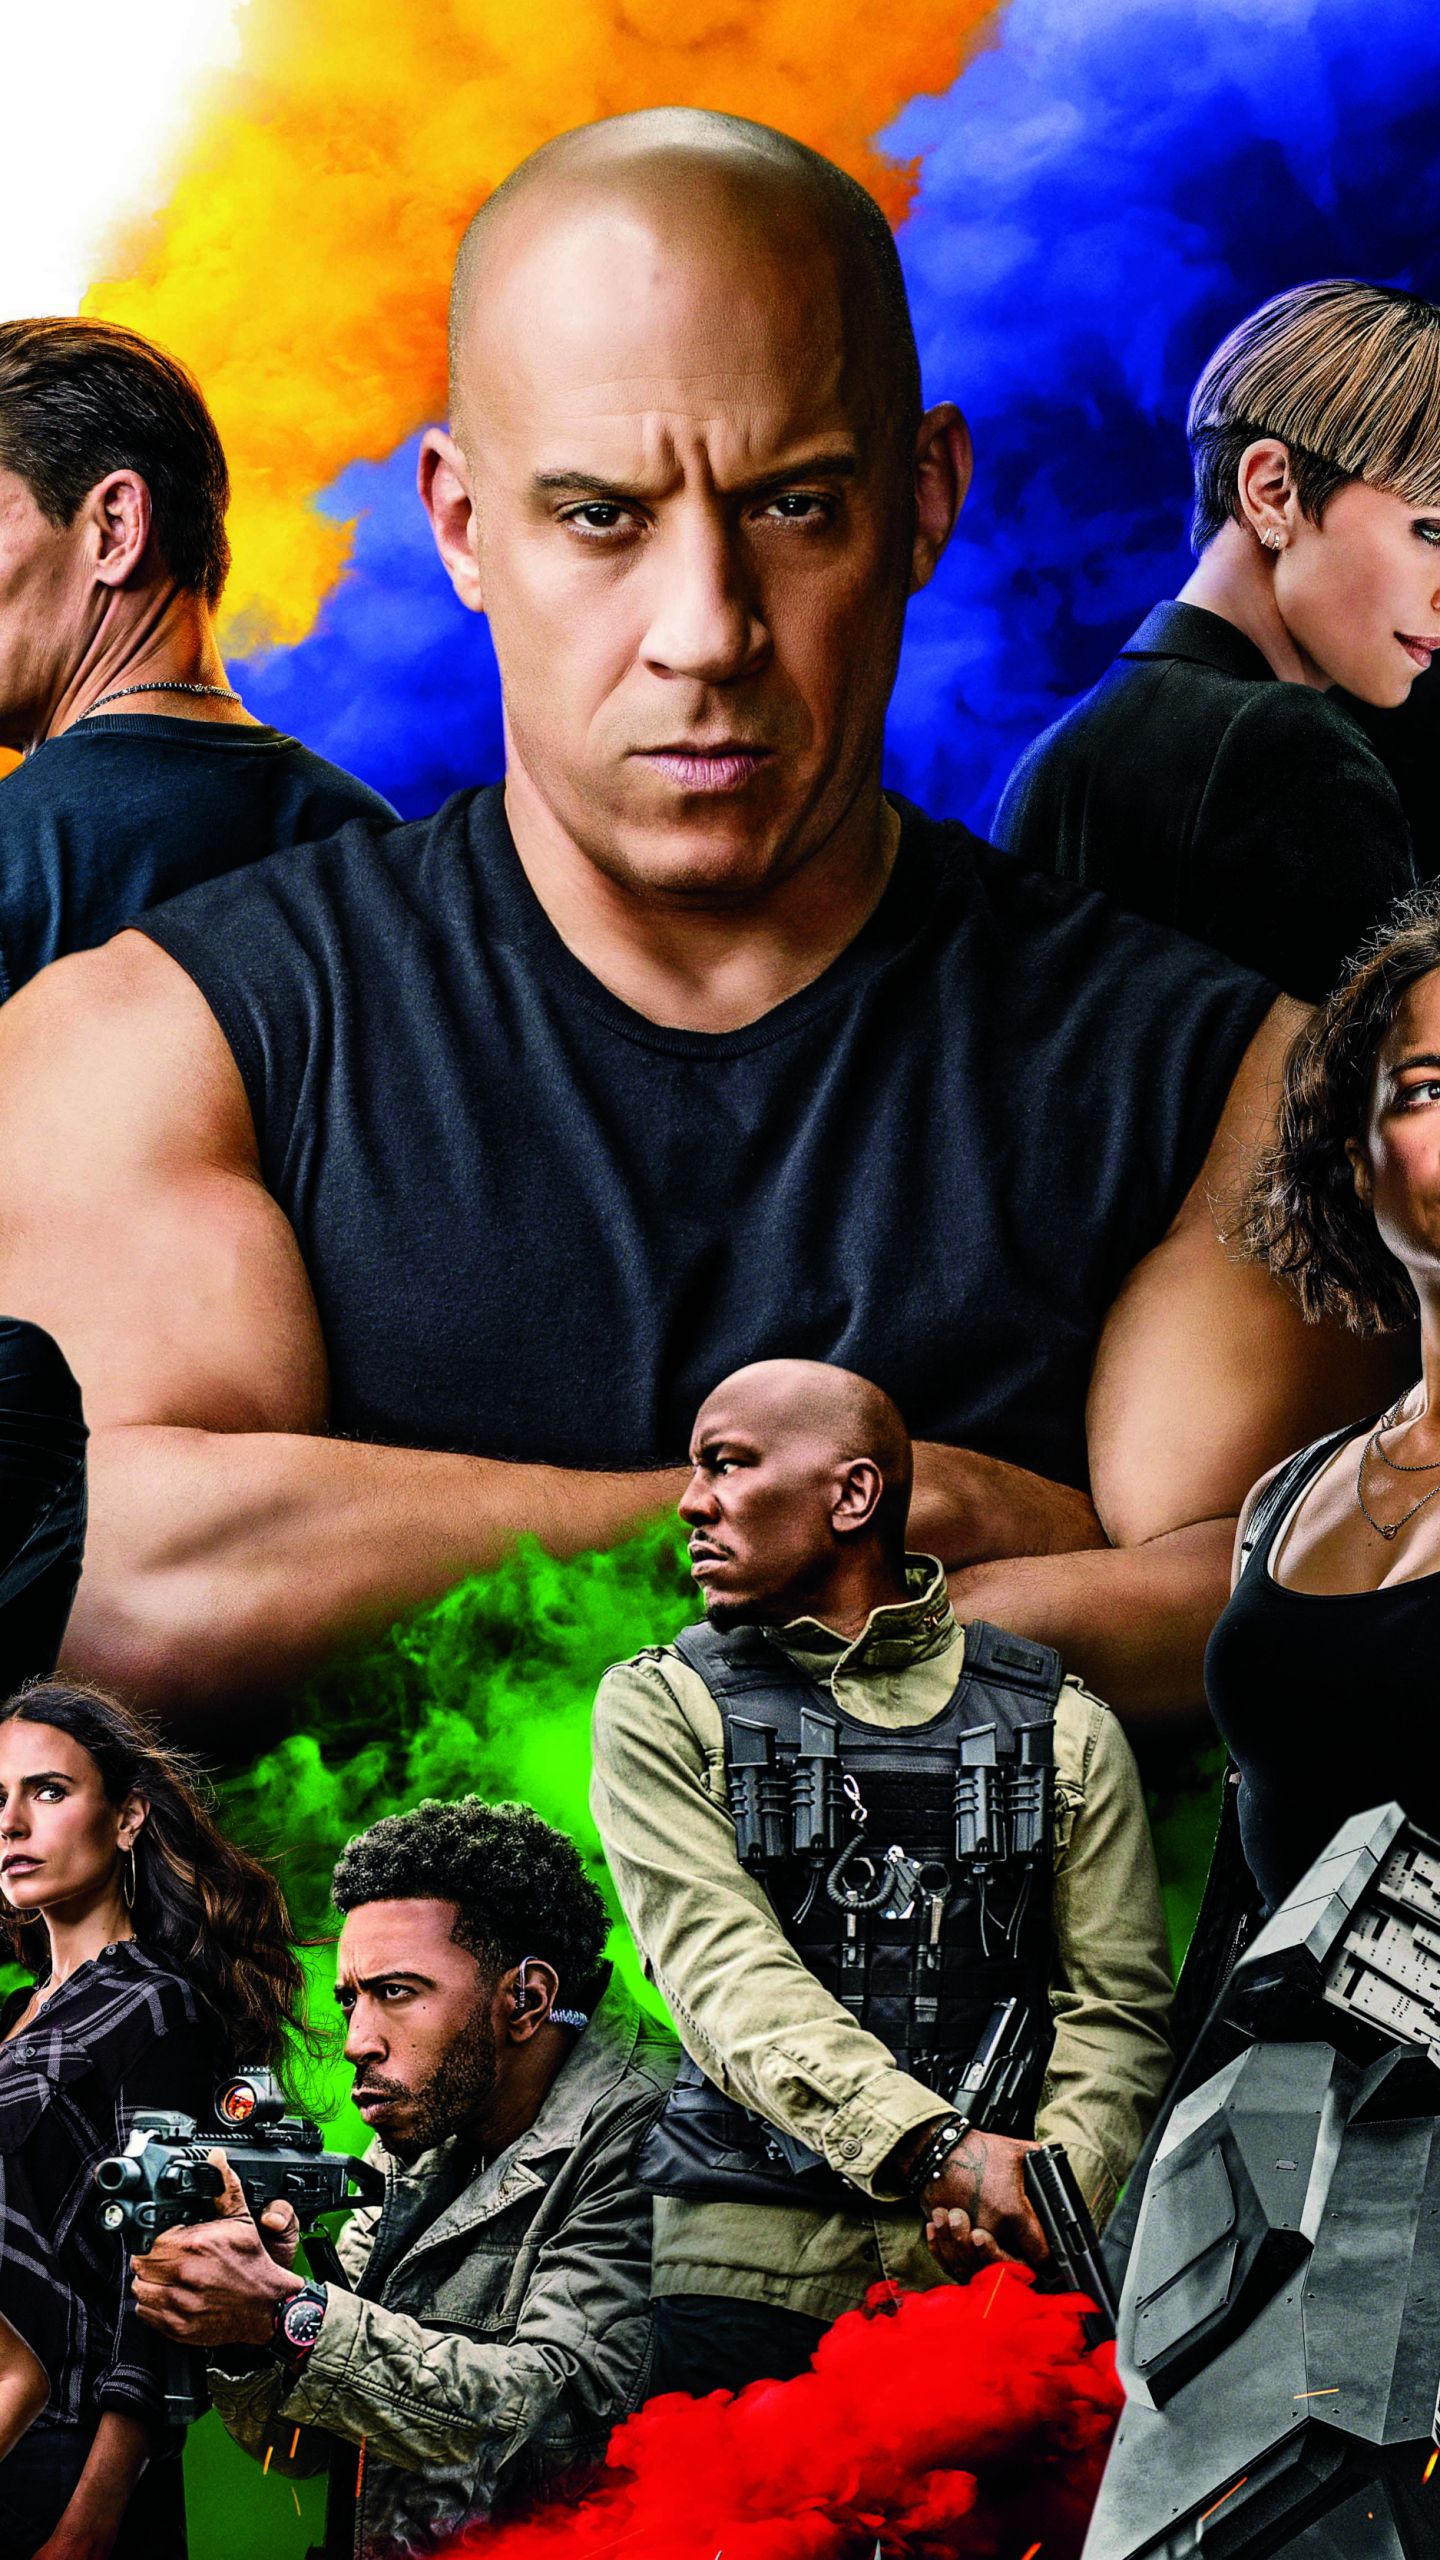 Download mobile wallpaper Fast & Furious, Vin Diesel, Movie, Dominic Toretto, Tyrese Gibson, Ludacris, Roman Pearce, Tej (Fast & Furious), Fast & Furious 9 for free.